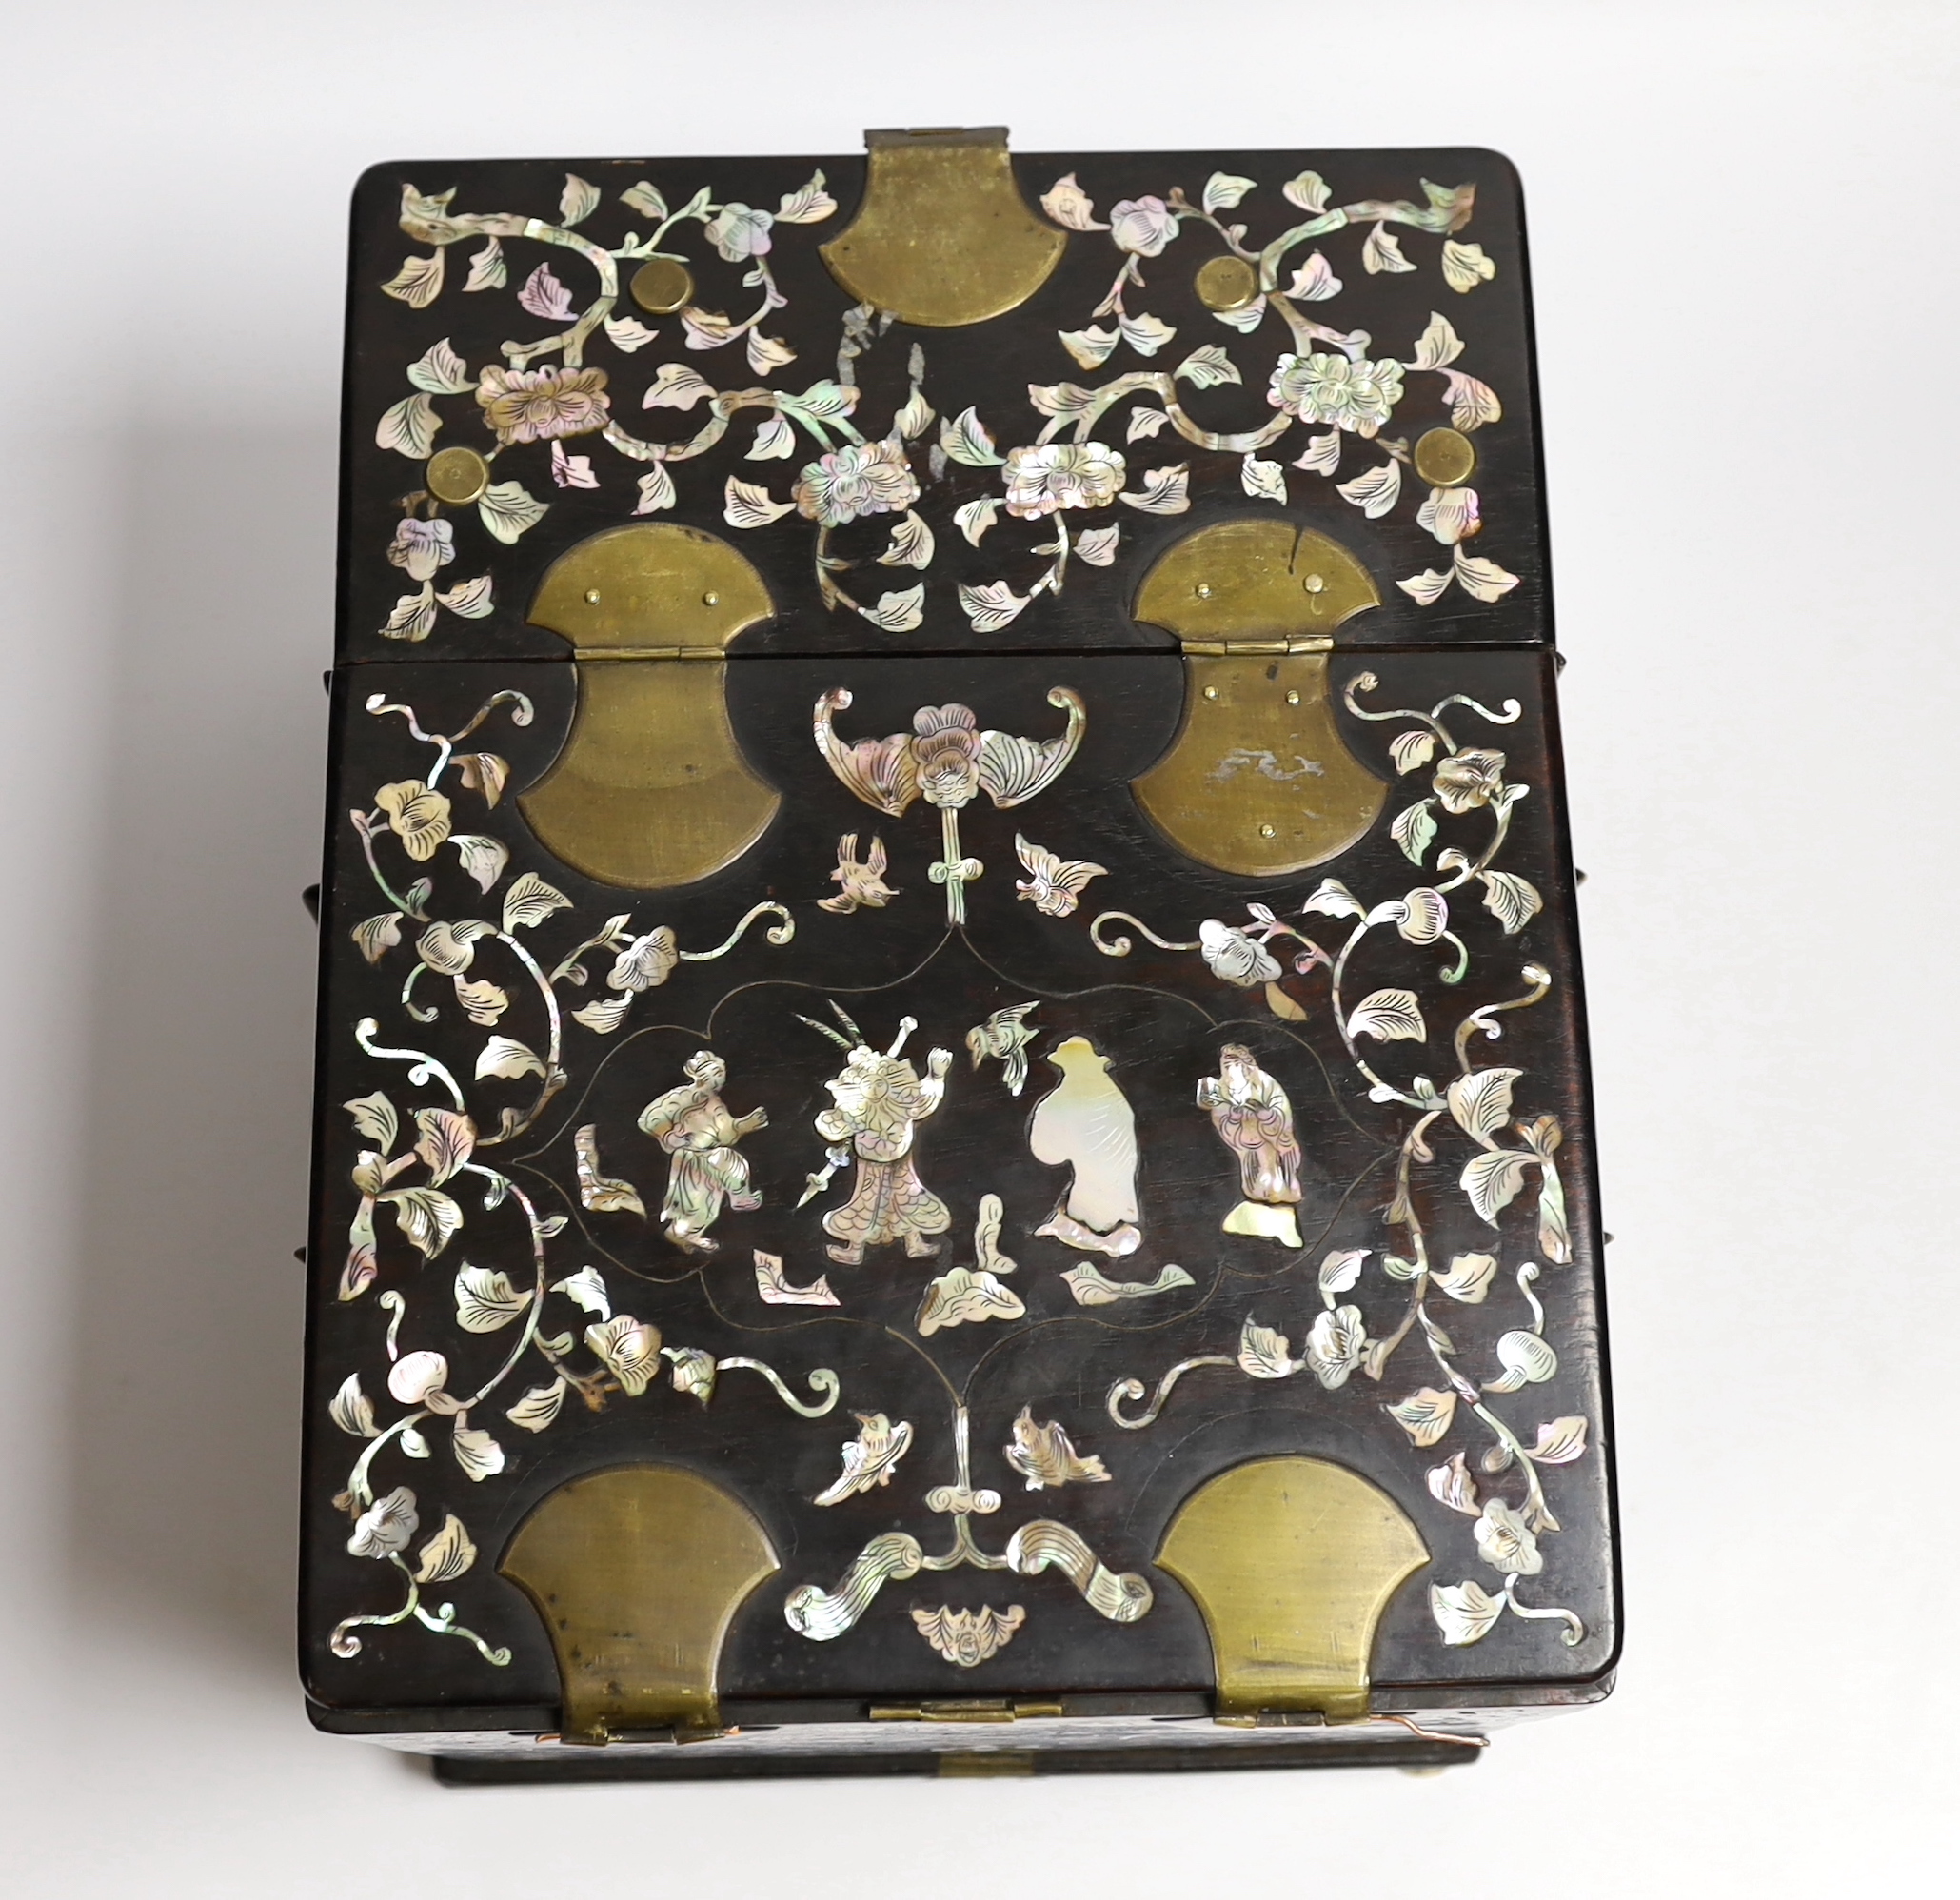 A Chinese mother-of- pearl inlaid hongmu vanity cabinet, late Qing dynasty, with fitted interior comprising a mirror, drawers, etc. 24cm x 31cm x 20cm